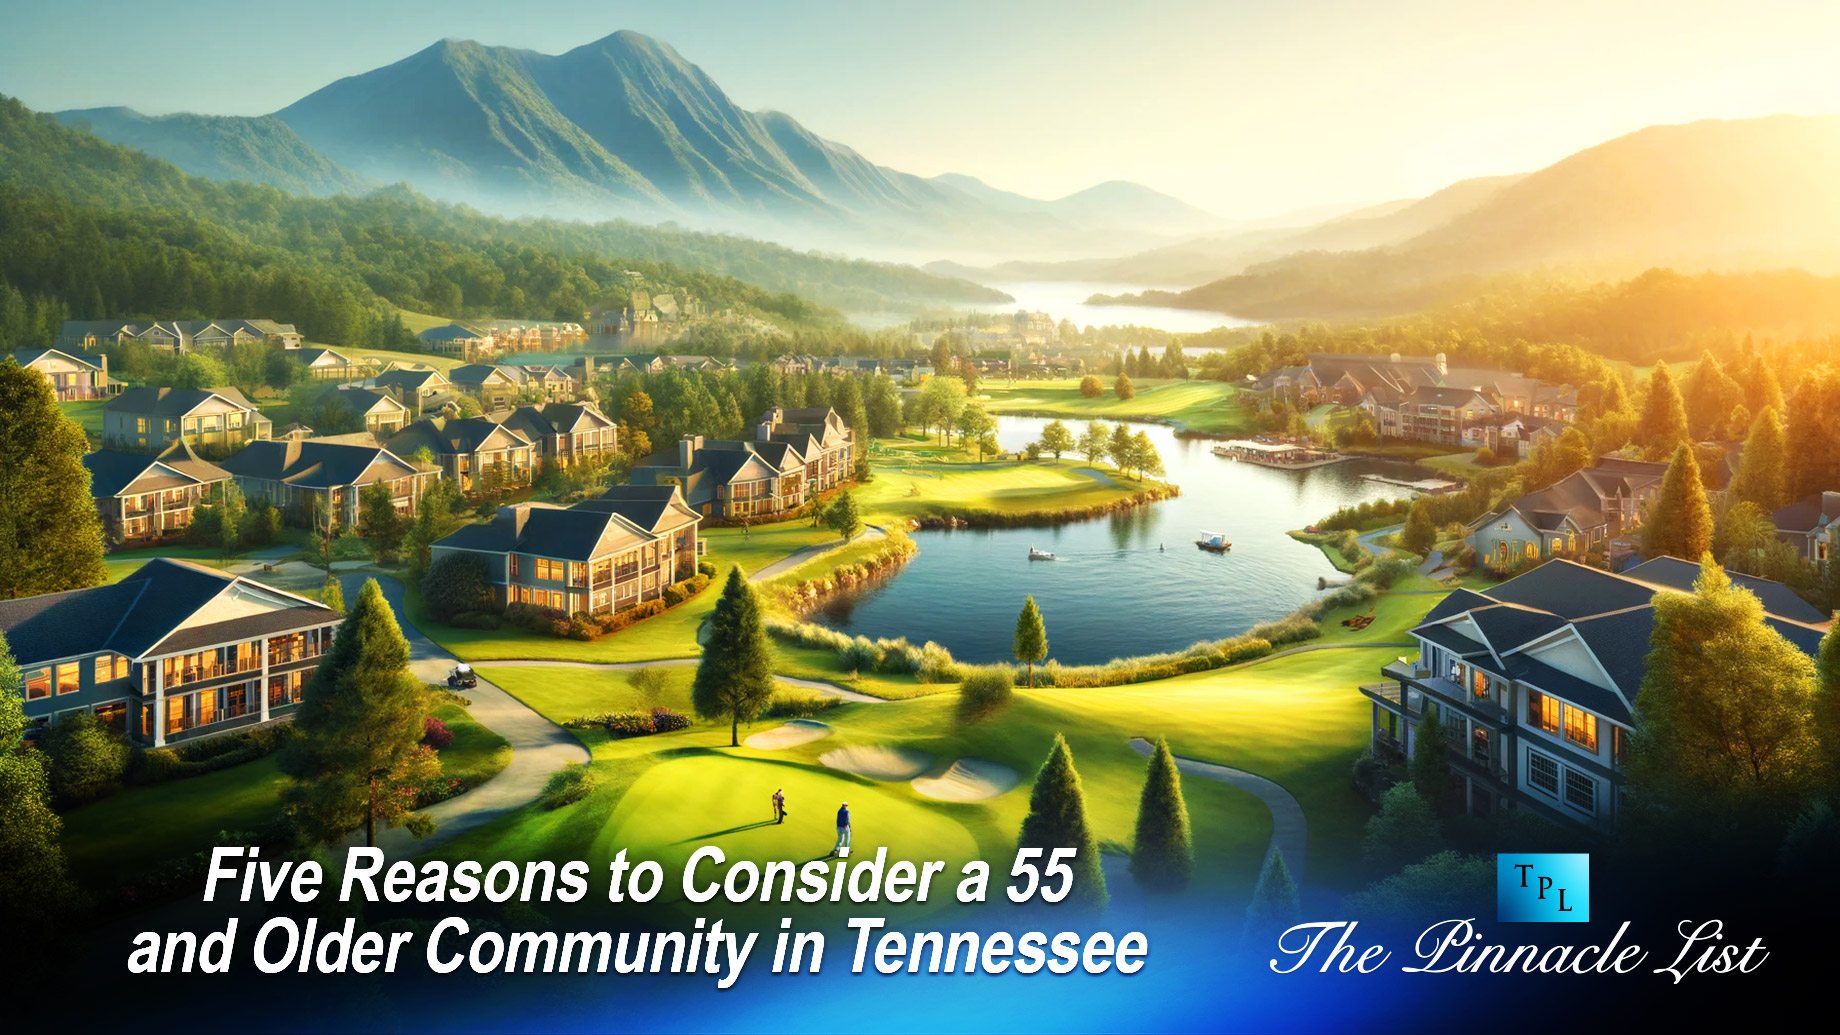 Five Reasons to Consider a 55 and Older Community in Tennessee